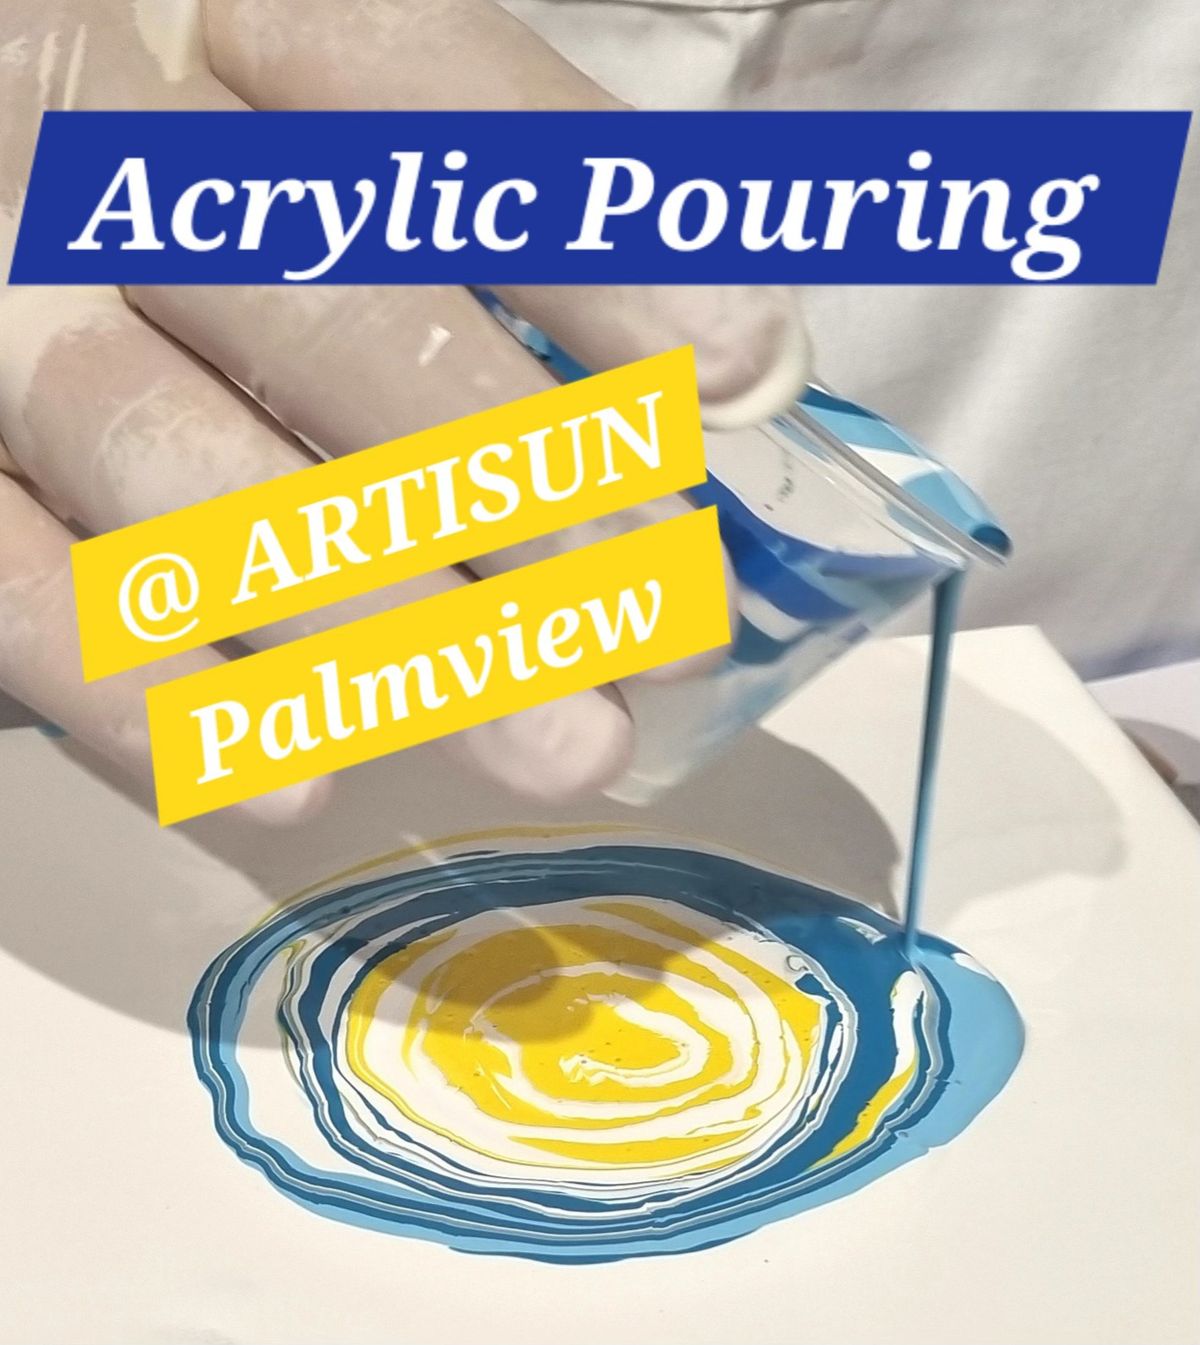 ACRYLIC POURING - Intro - Palmview